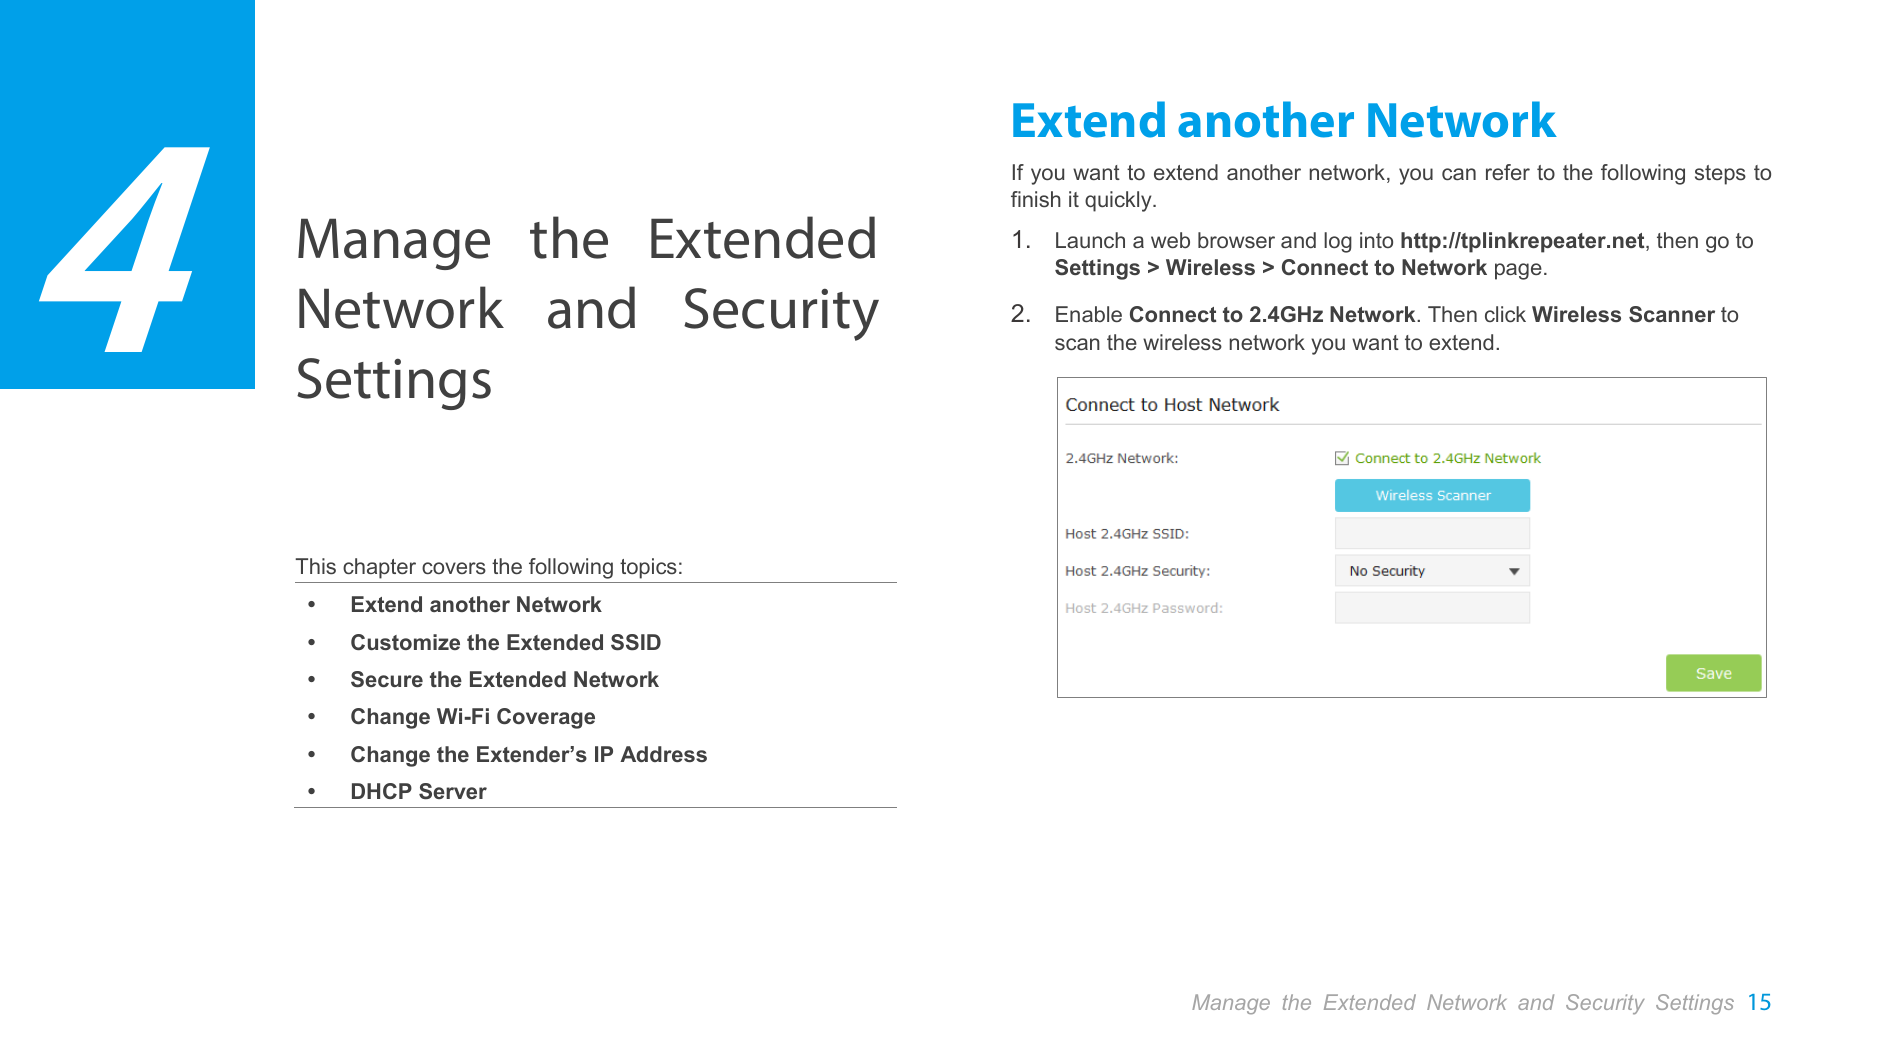  Manage the Extended Network and Security Settings 15  Manage the Extended Network and Security Settings    This chapter covers the following topics:  Extend another Network  Customize the Extended SSID  Secure the Extended Network  Change Wi-Fi Coverage  Change the Extender’s IP Address  DHCP Server Extend another Network If you want to extend another network, you can refer to the following steps to finish it quickly. 1. Launch a web browser and log into http://tplinkrepeater.net, then go to Settings &gt; Wireless &gt; Connect to Network page. 2. Enable Connect to 2.4GHz Network. Then click Wireless Scanner to scan the wireless network you want to extend.   4 